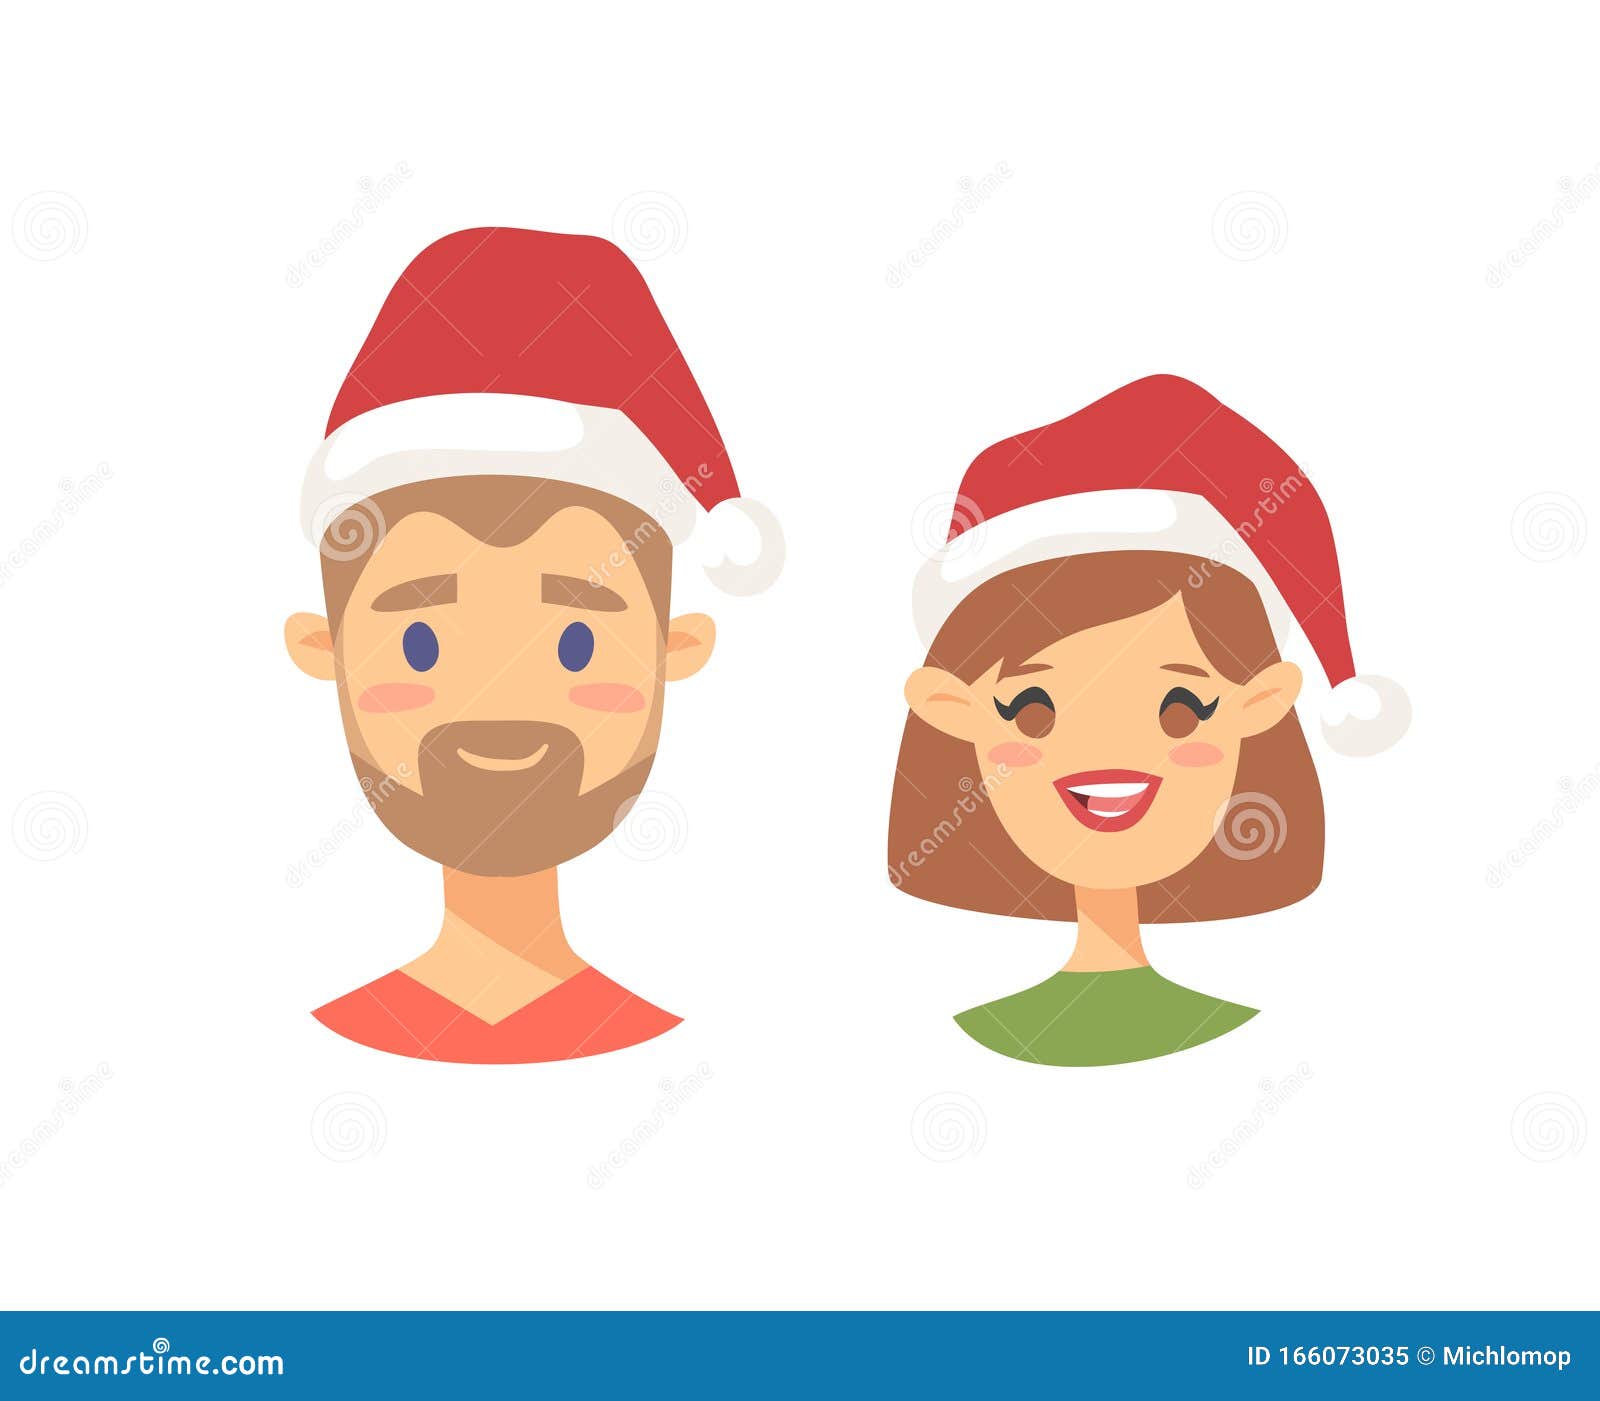 Create Christmas hat avatar with your photo